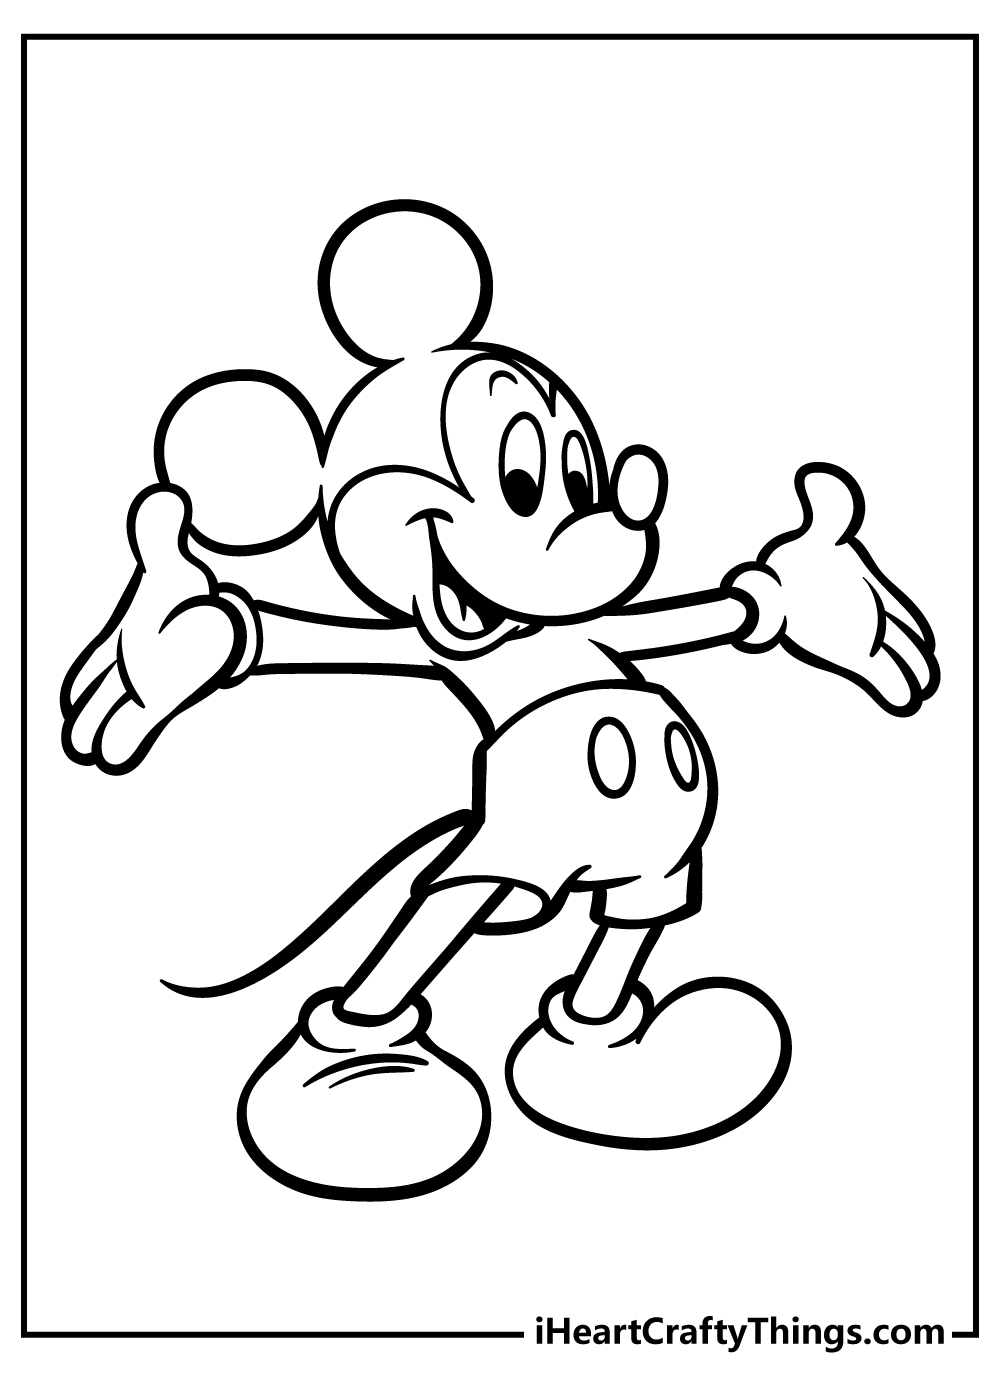 Mickey Mouse Coloring Book for adults free download